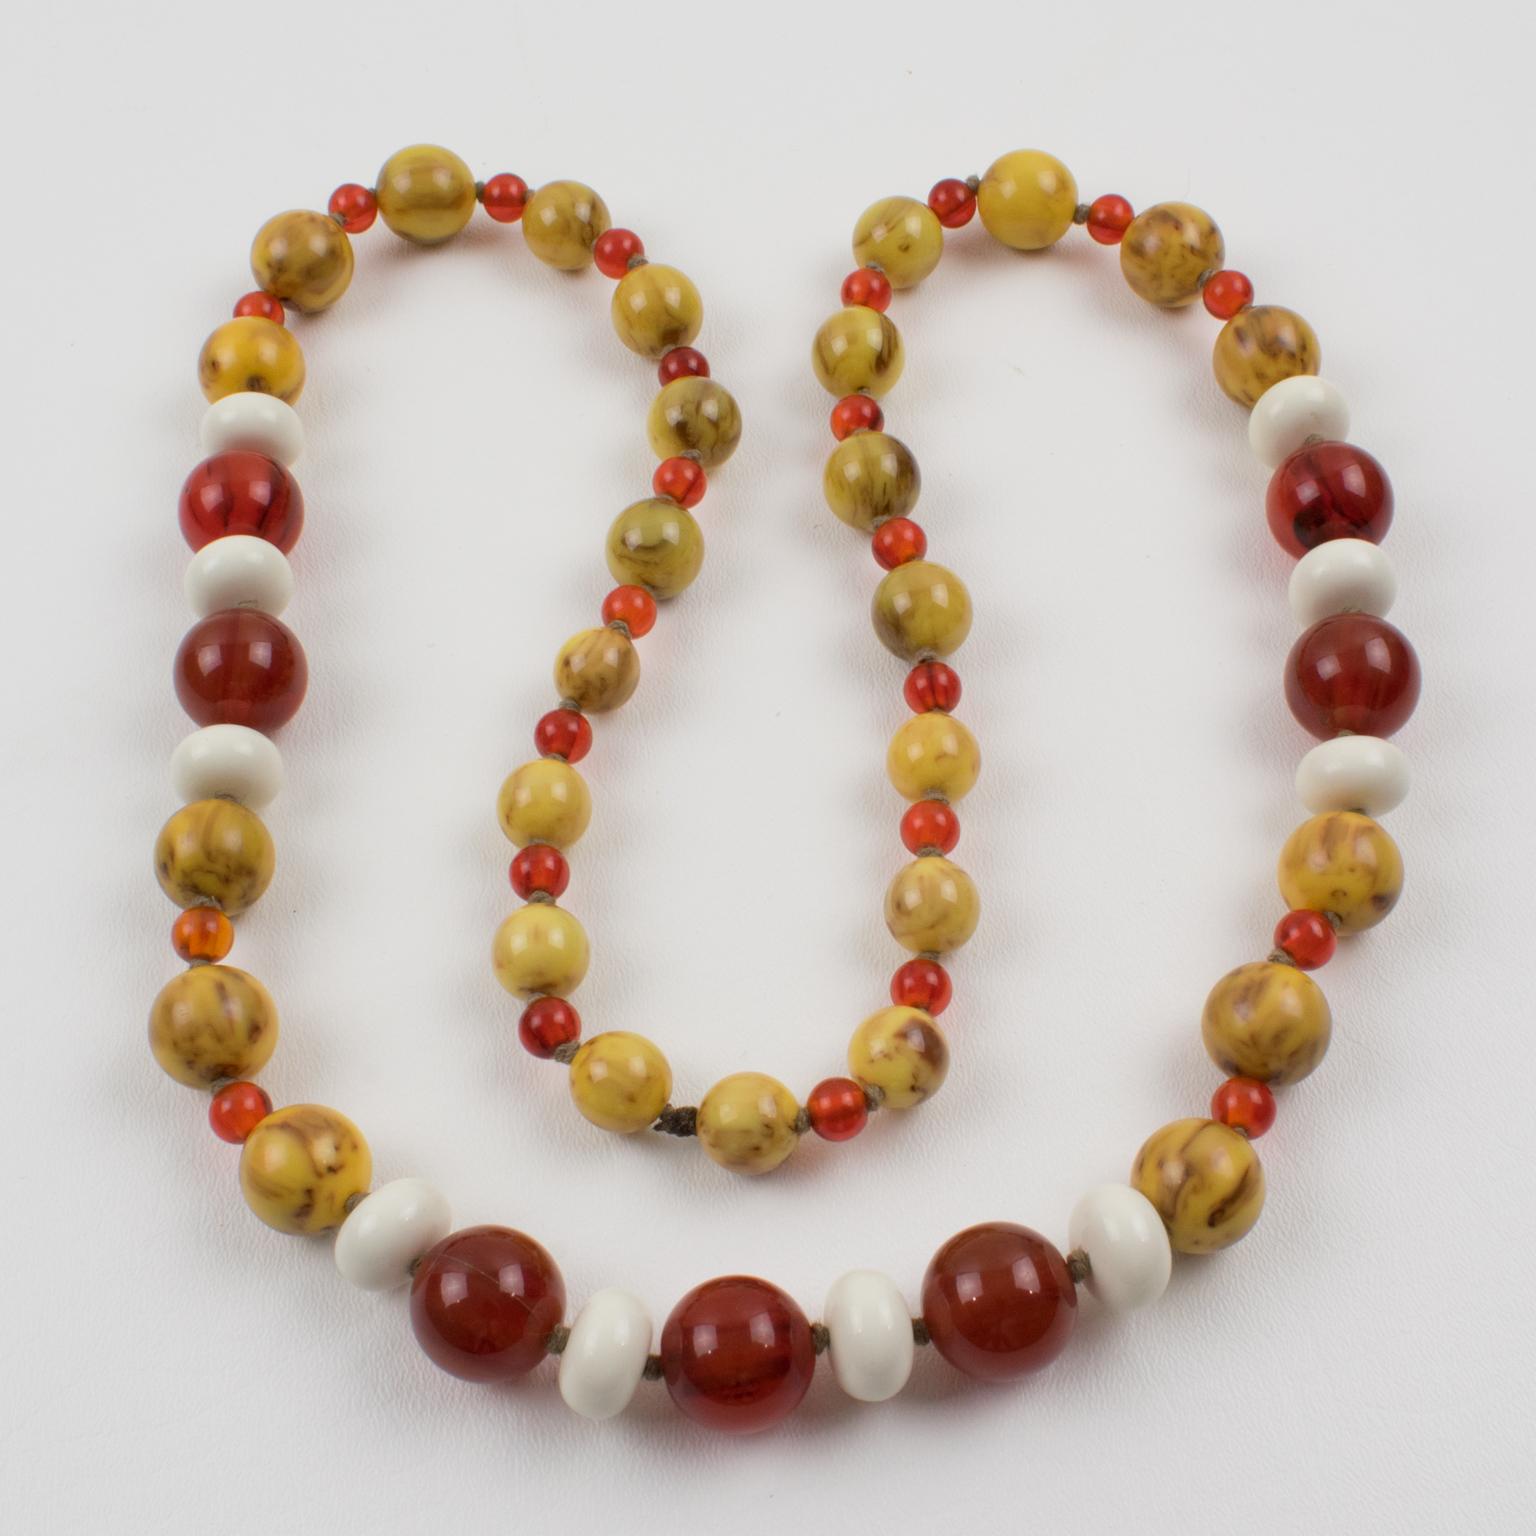 This superb extra-long beaded necklace features Bakelite and Lucite beads in assorted round and tomato shapes. The mix and match of fall colors boasts rootbeer marble, transparent red tea, and chocolate-custard marble contrasted with white Lucite